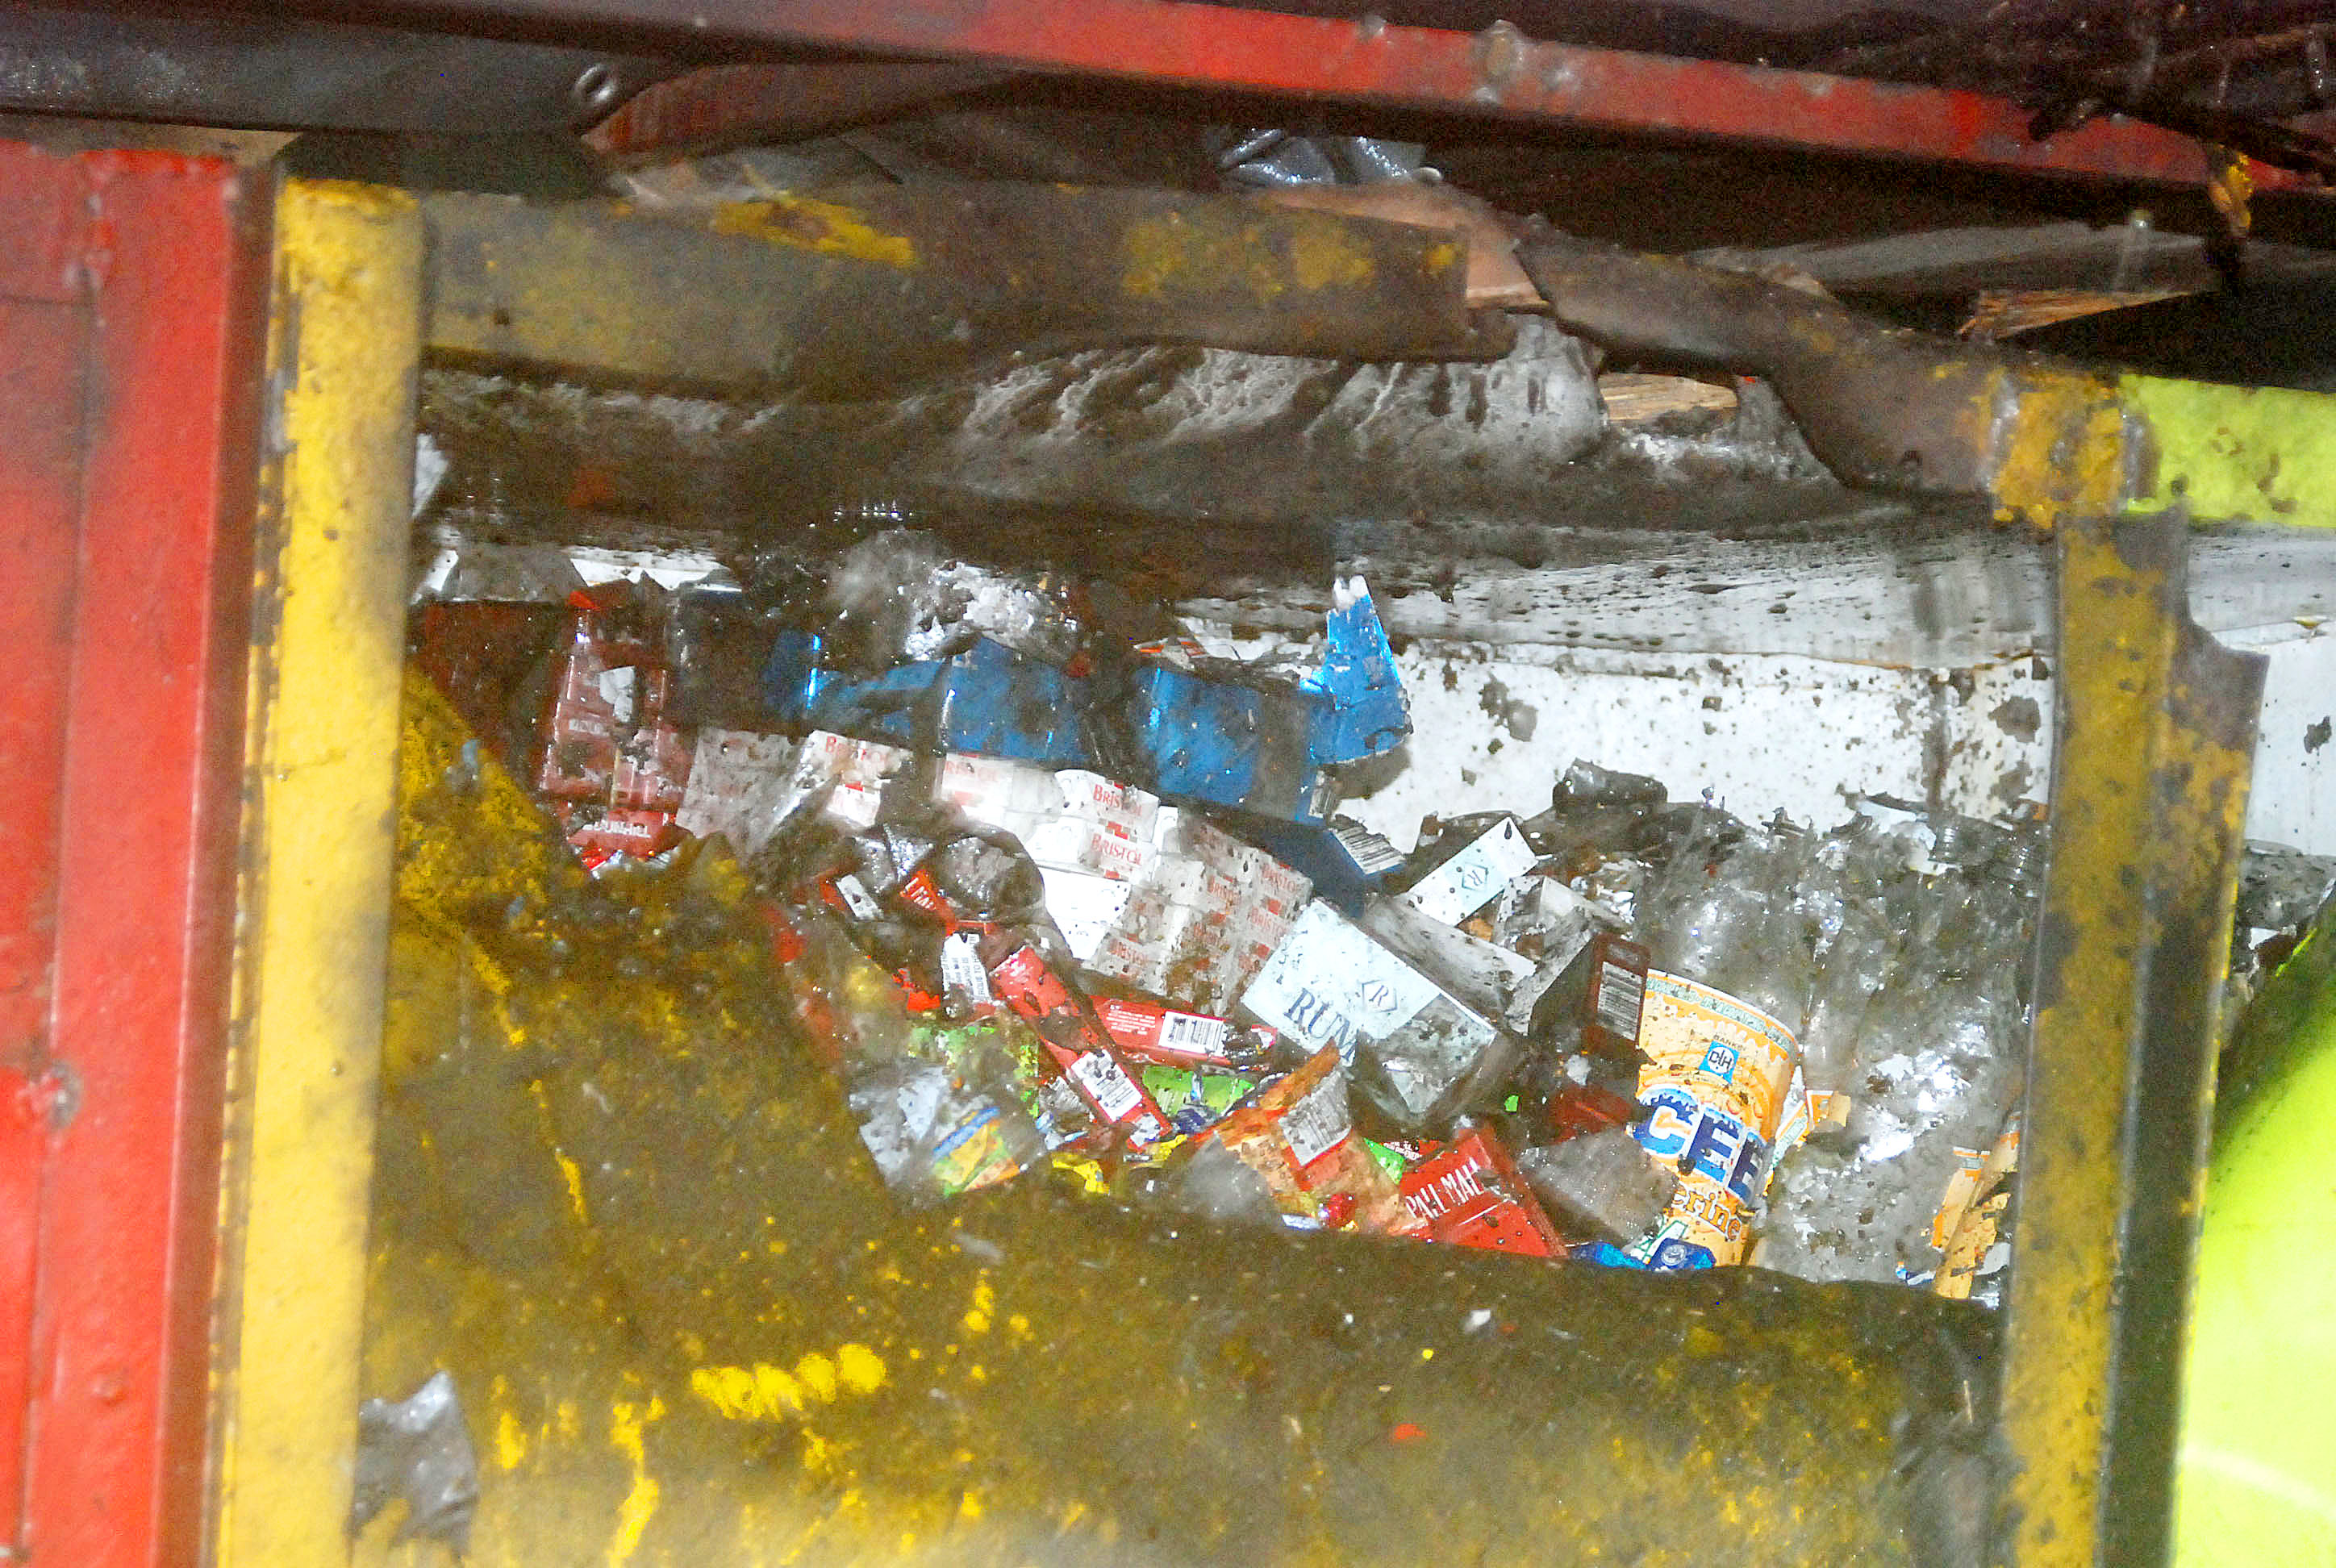 The damaged cooler in Mark Hyman's stall hours after the explosion. (Jules Gibson photo)